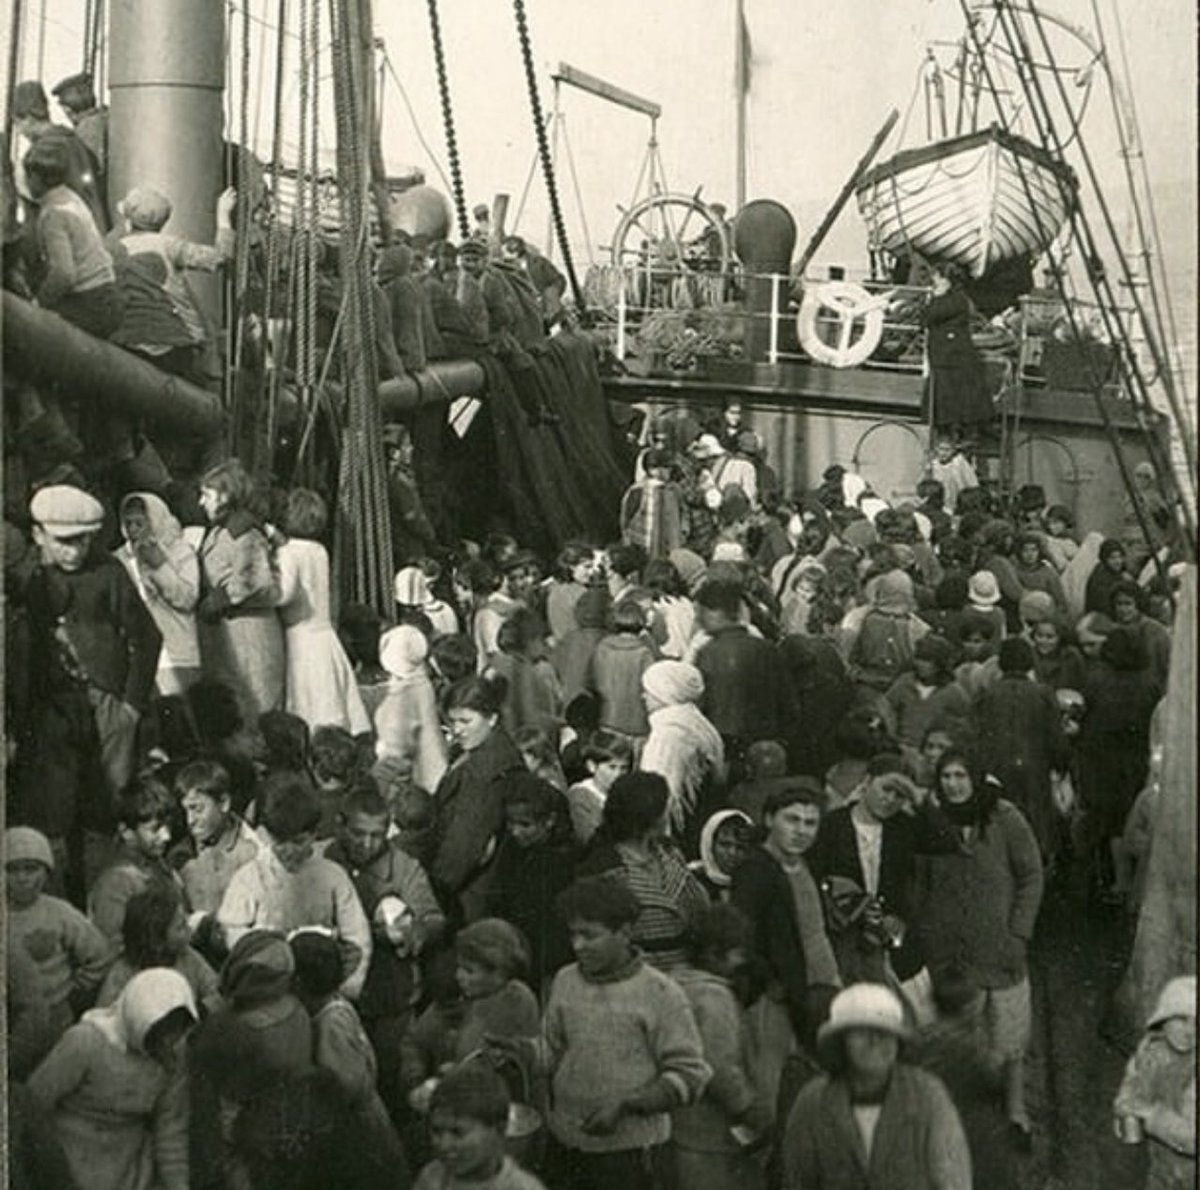 🇦🇲🇬🇷 Armenian and Greek orphans in the port of Samson aboard a ship bound for Greece in November 1922. 

#ArmenianGenocide #GreekGenocide